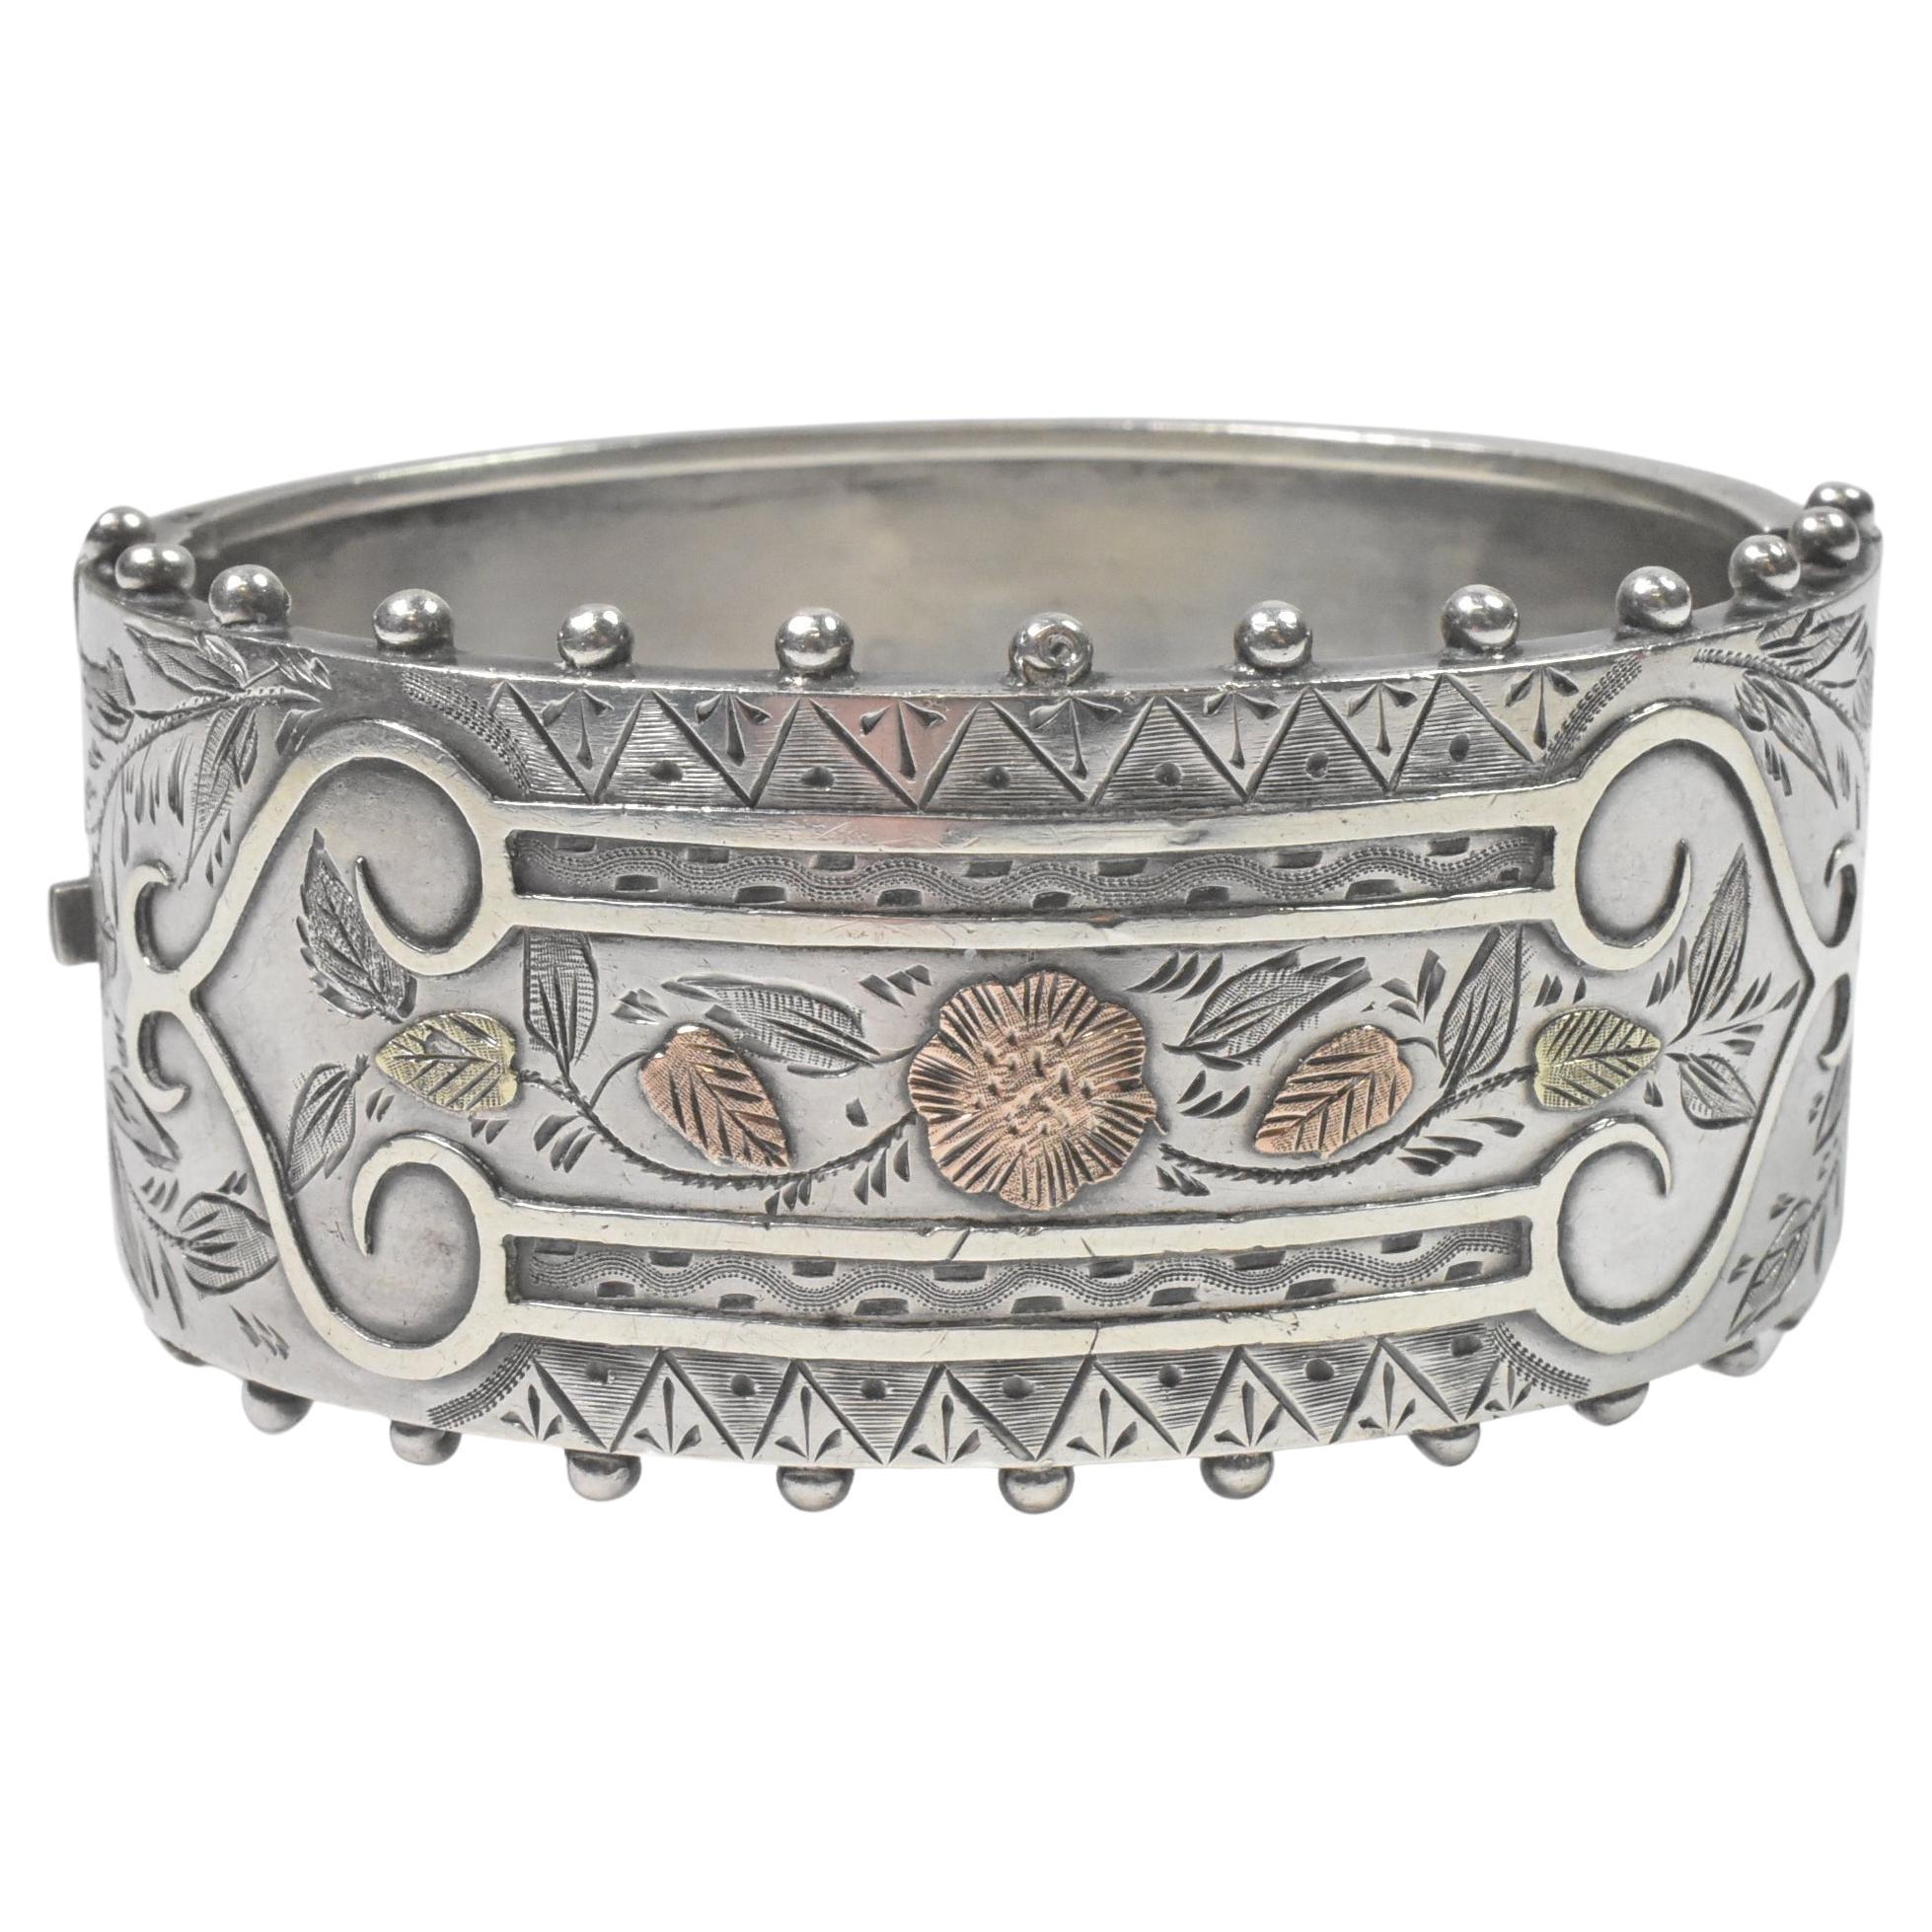 A. Brandt & Son Victorian Sterling Silver Mixed Metals Bangle Bracelet